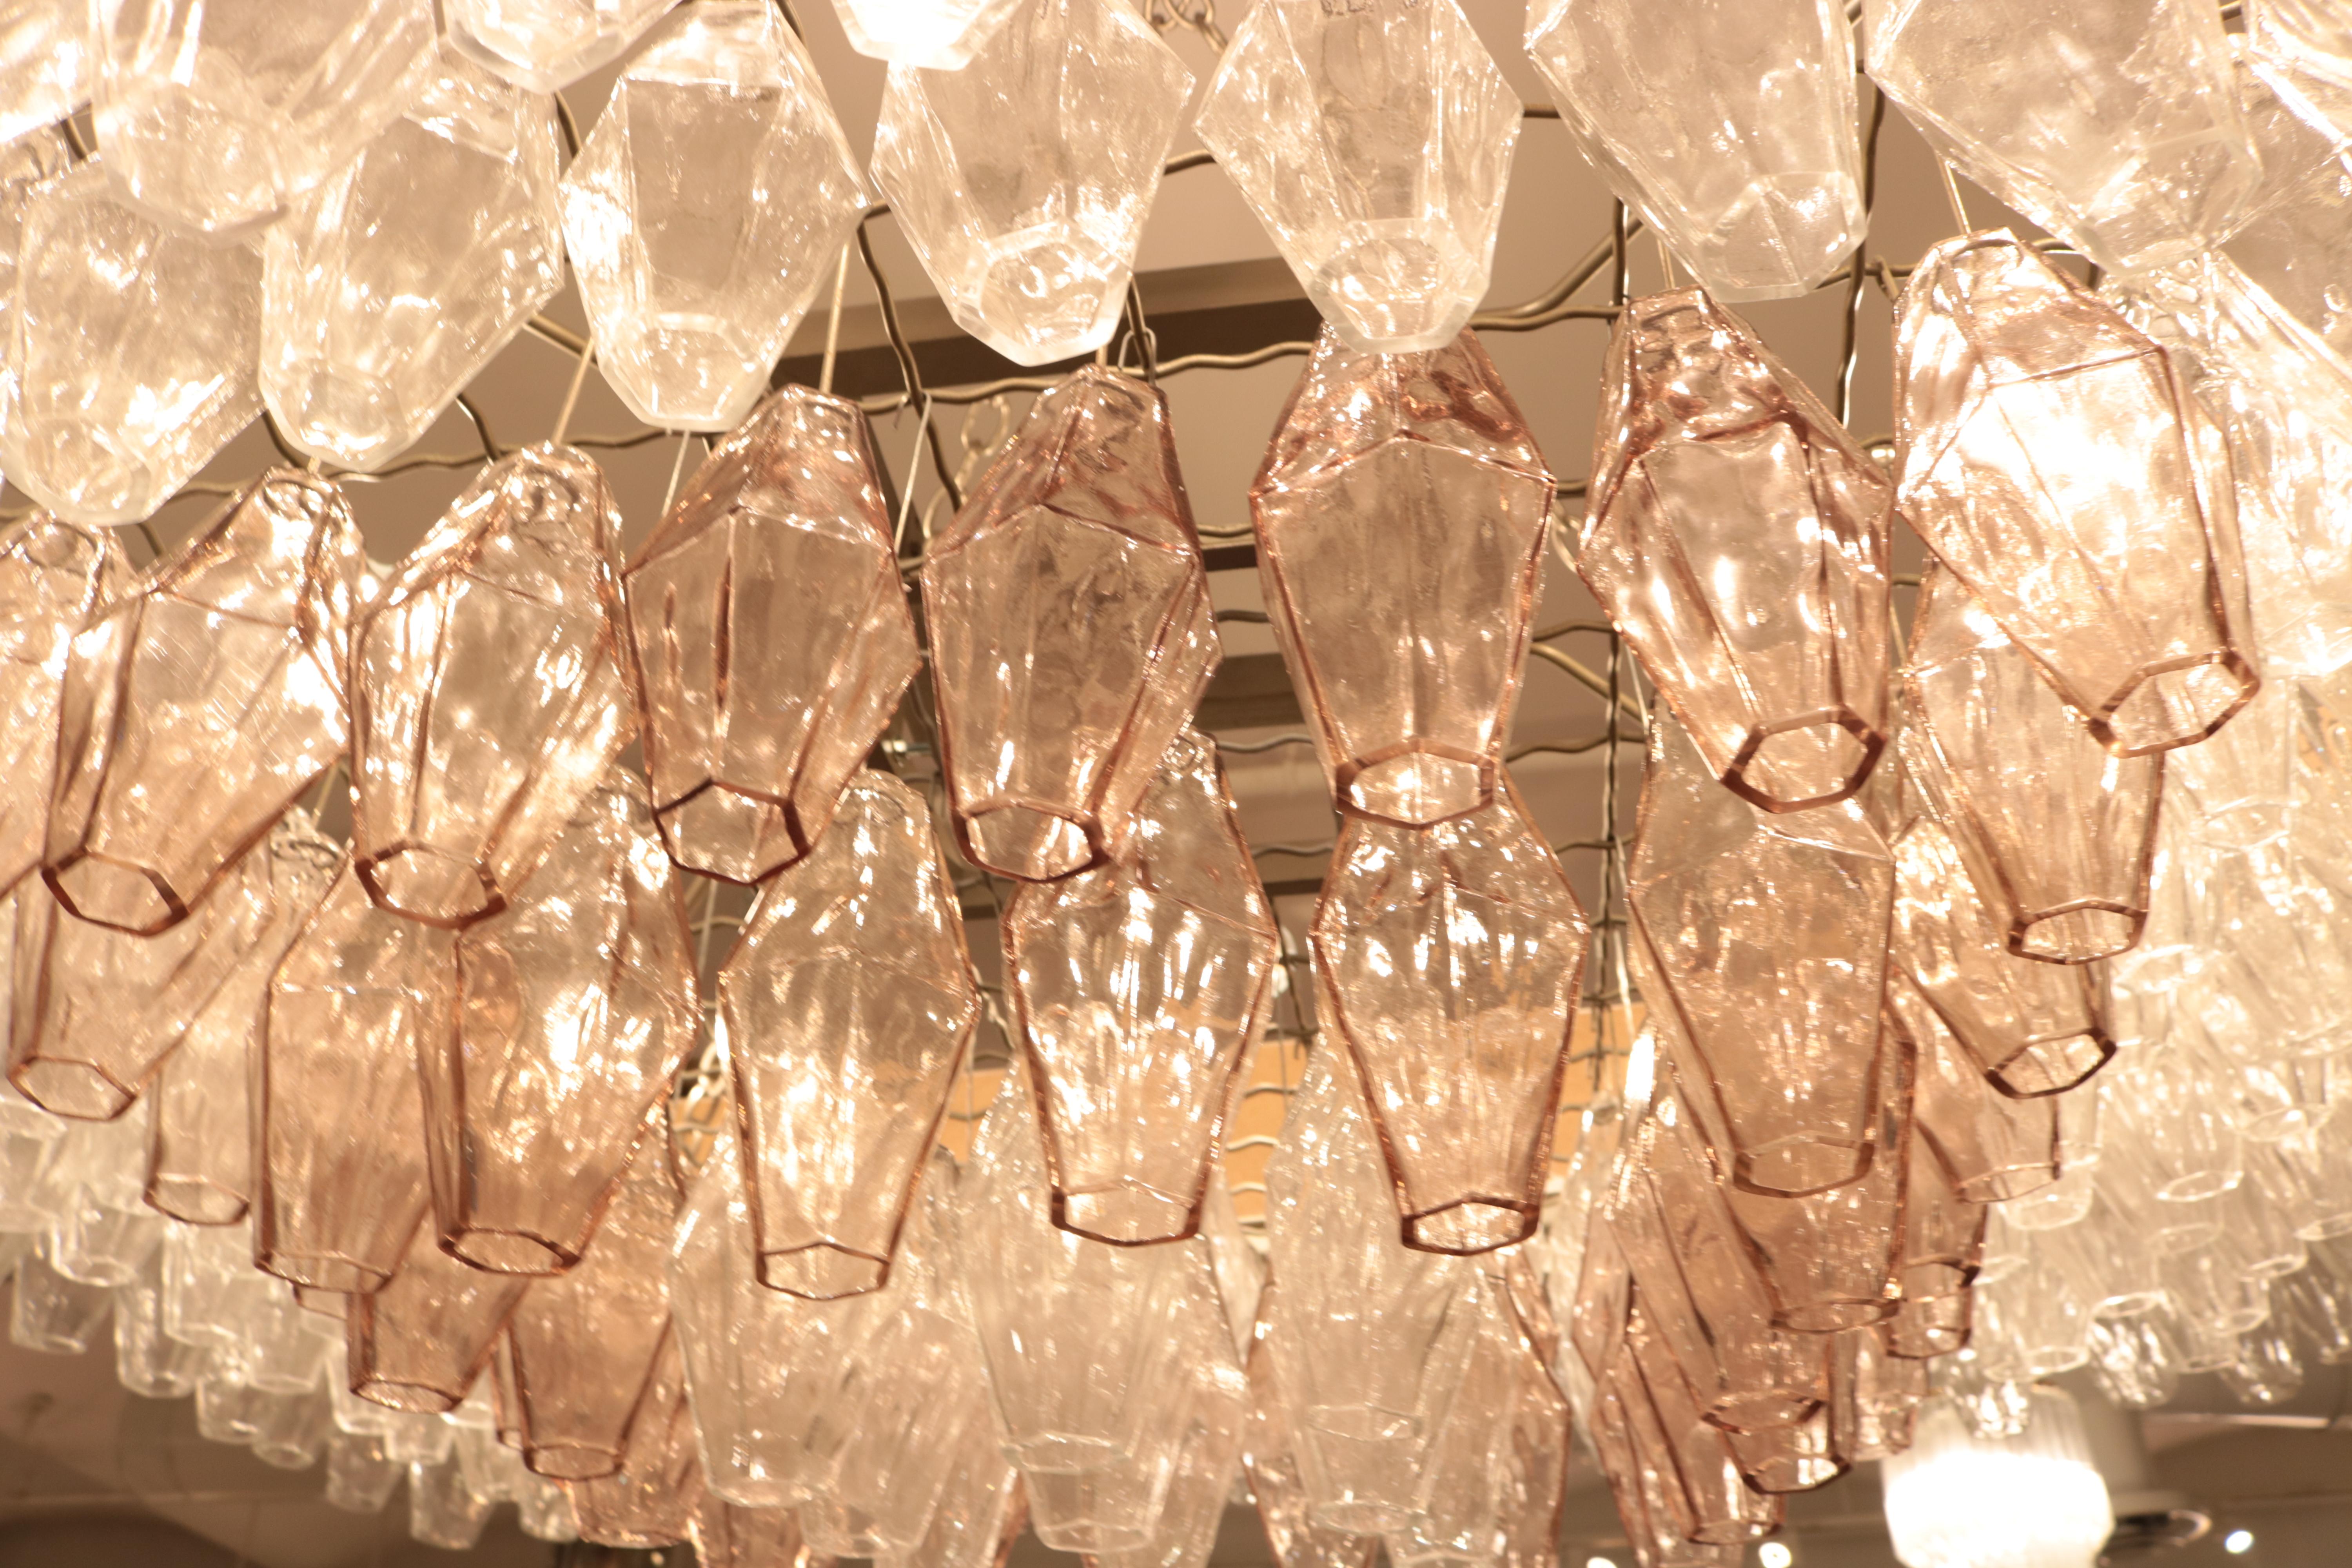 A large Venini glass light installation. Numerous clear and rose colored glass cylinders hang from a metal wire frame lit with eight lights from above. Enclosed in a modern wooden enclosure.